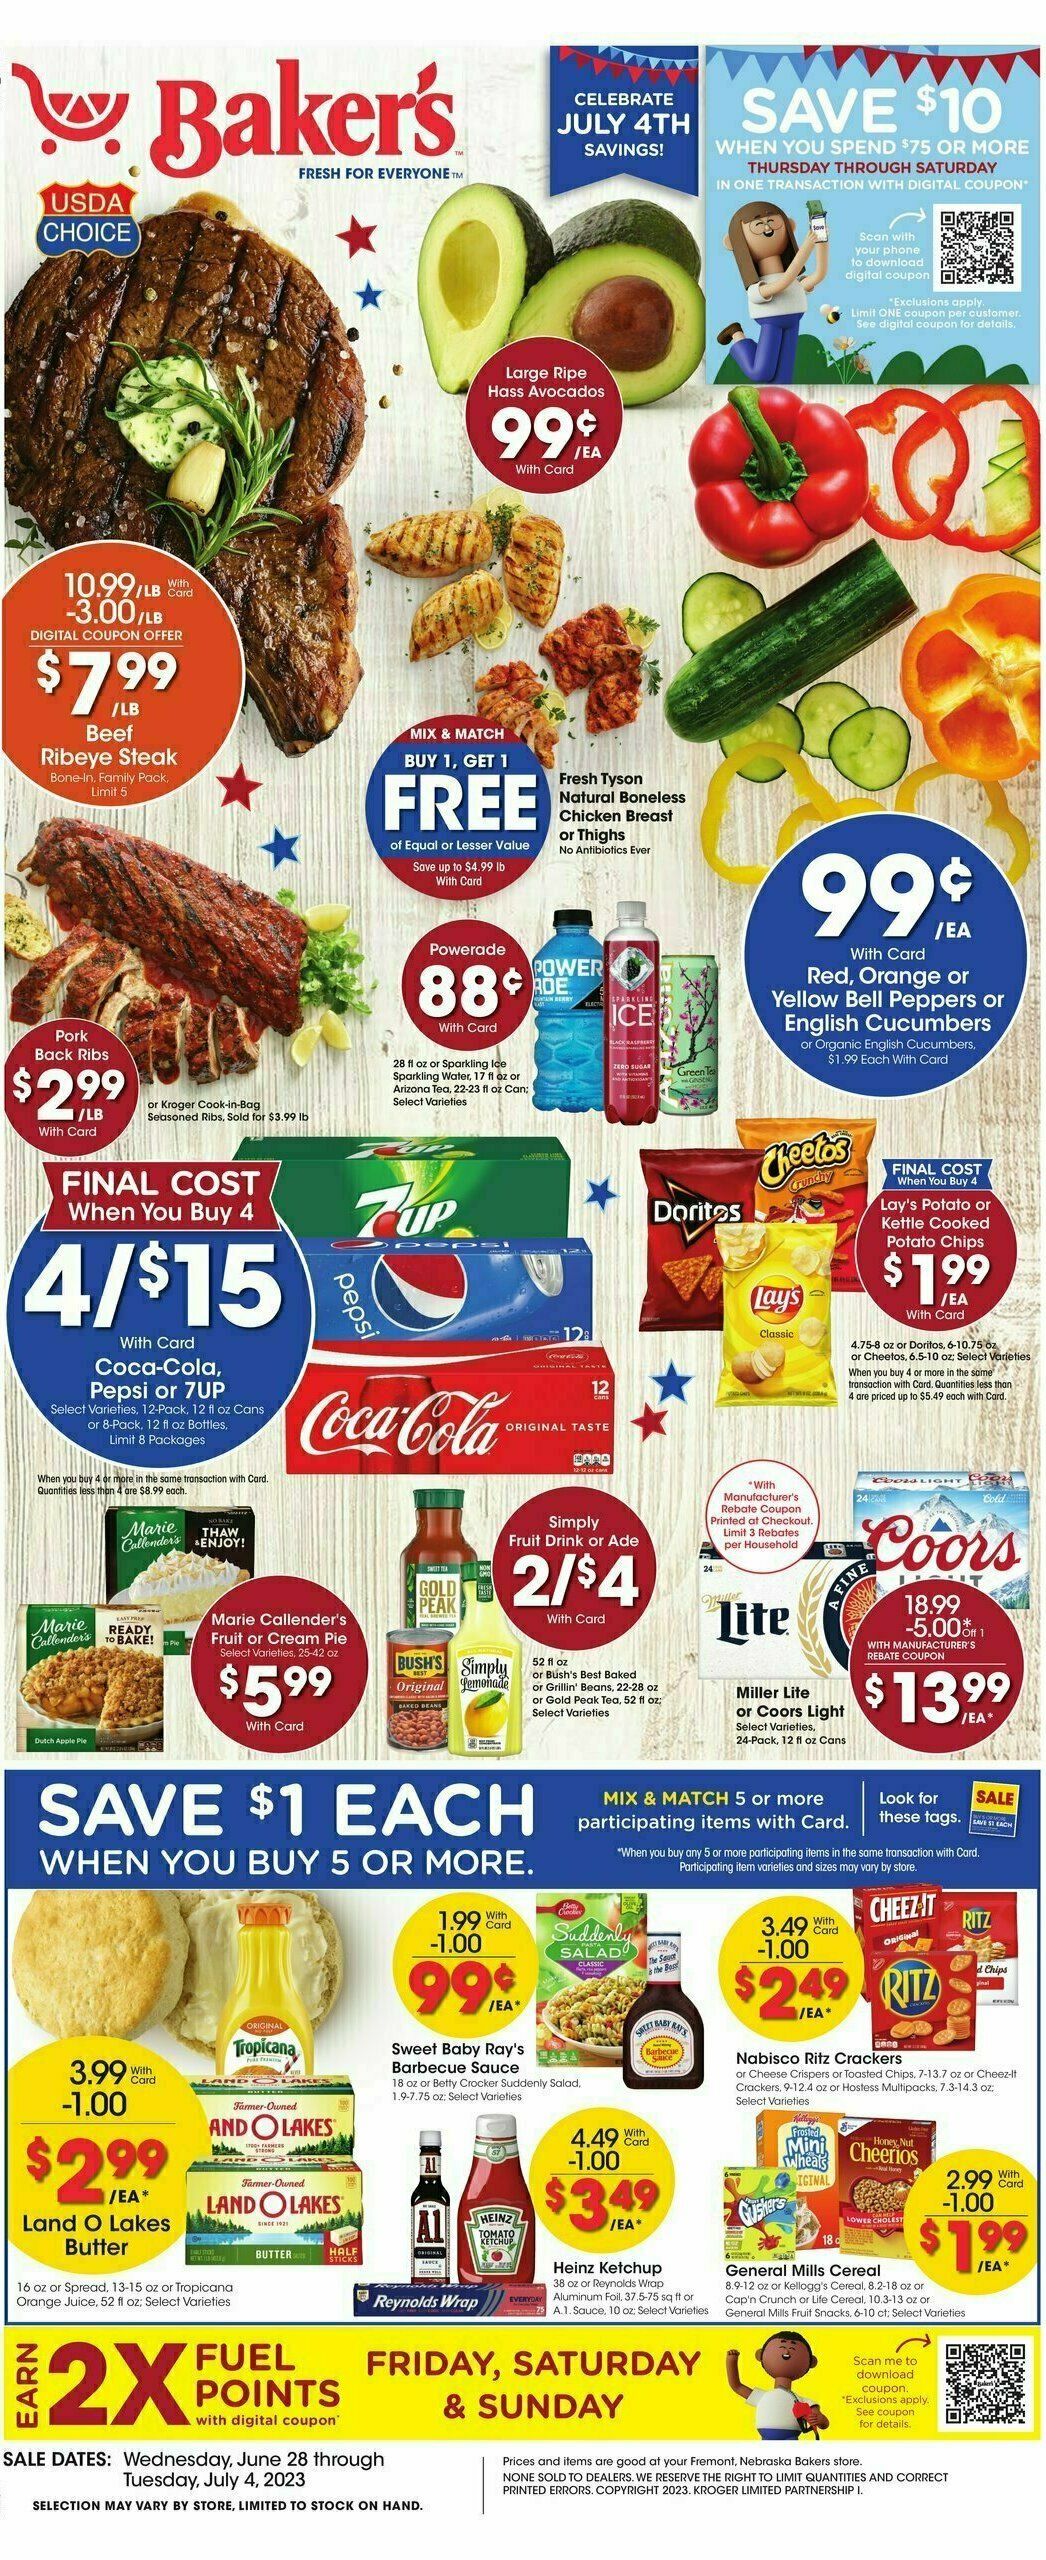 Baker's Weekly Ad from June 28